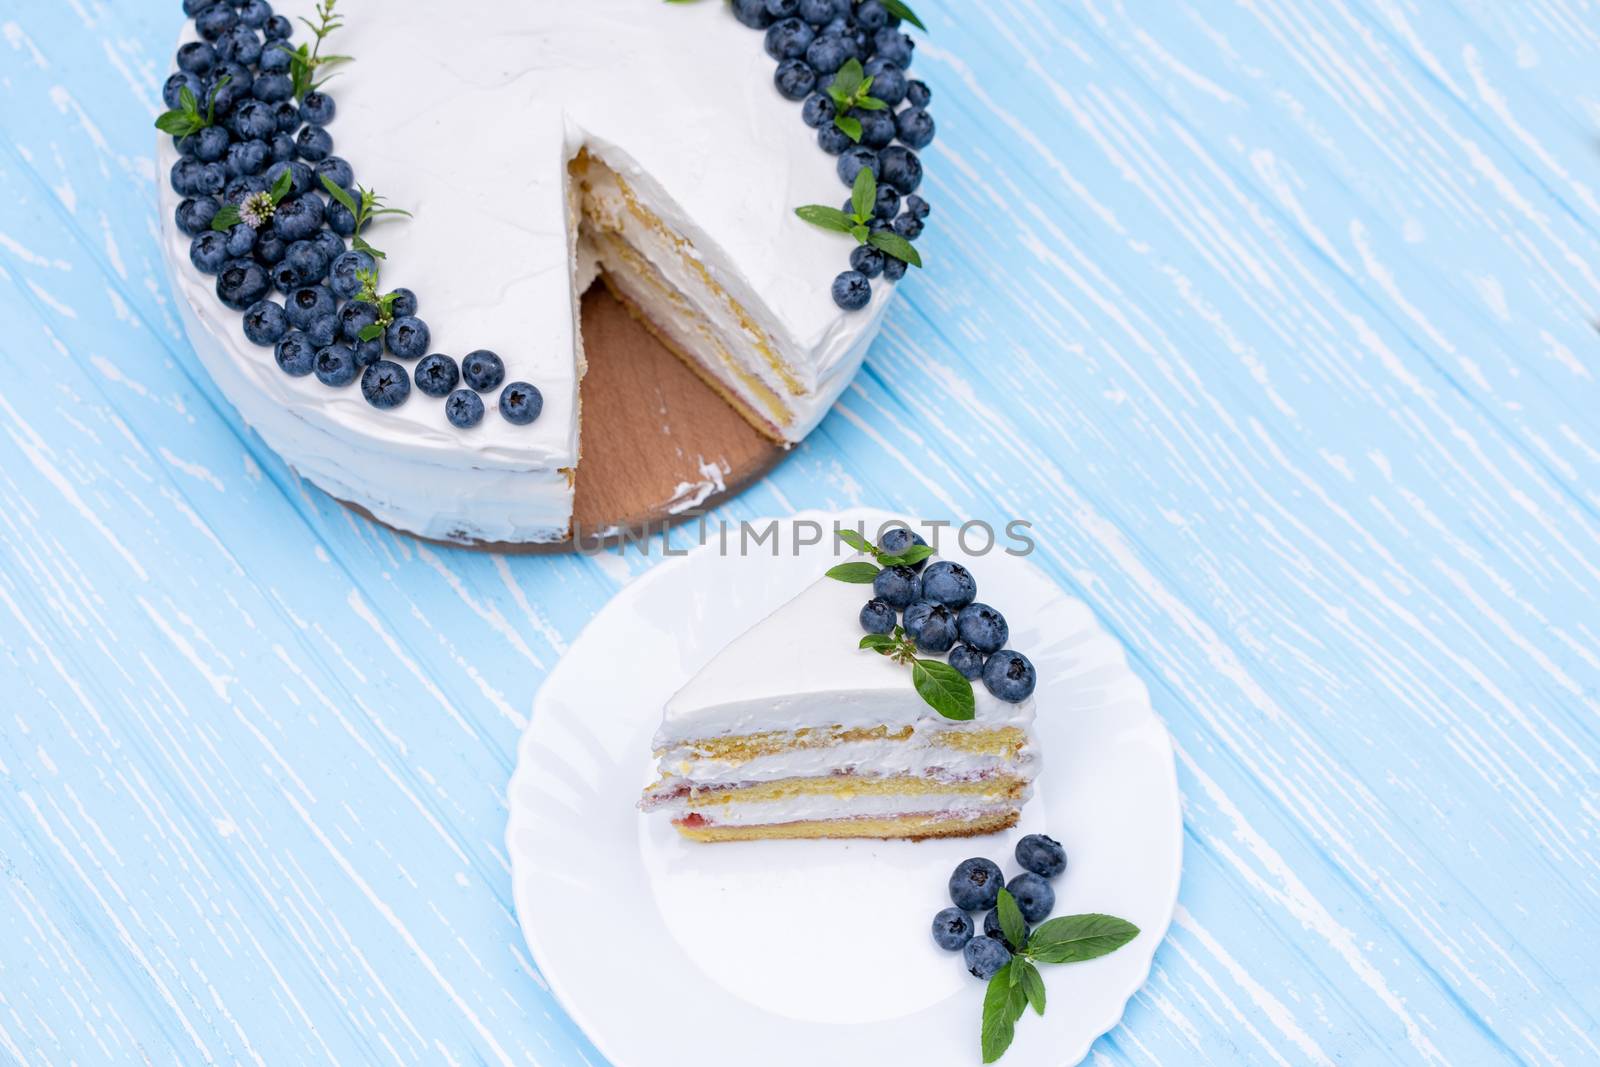 Appetizing cheesecake biscuit pillow decorated white cream blueberries and mint stands on wooden blue rustic table. Sweet cake with piece on plate